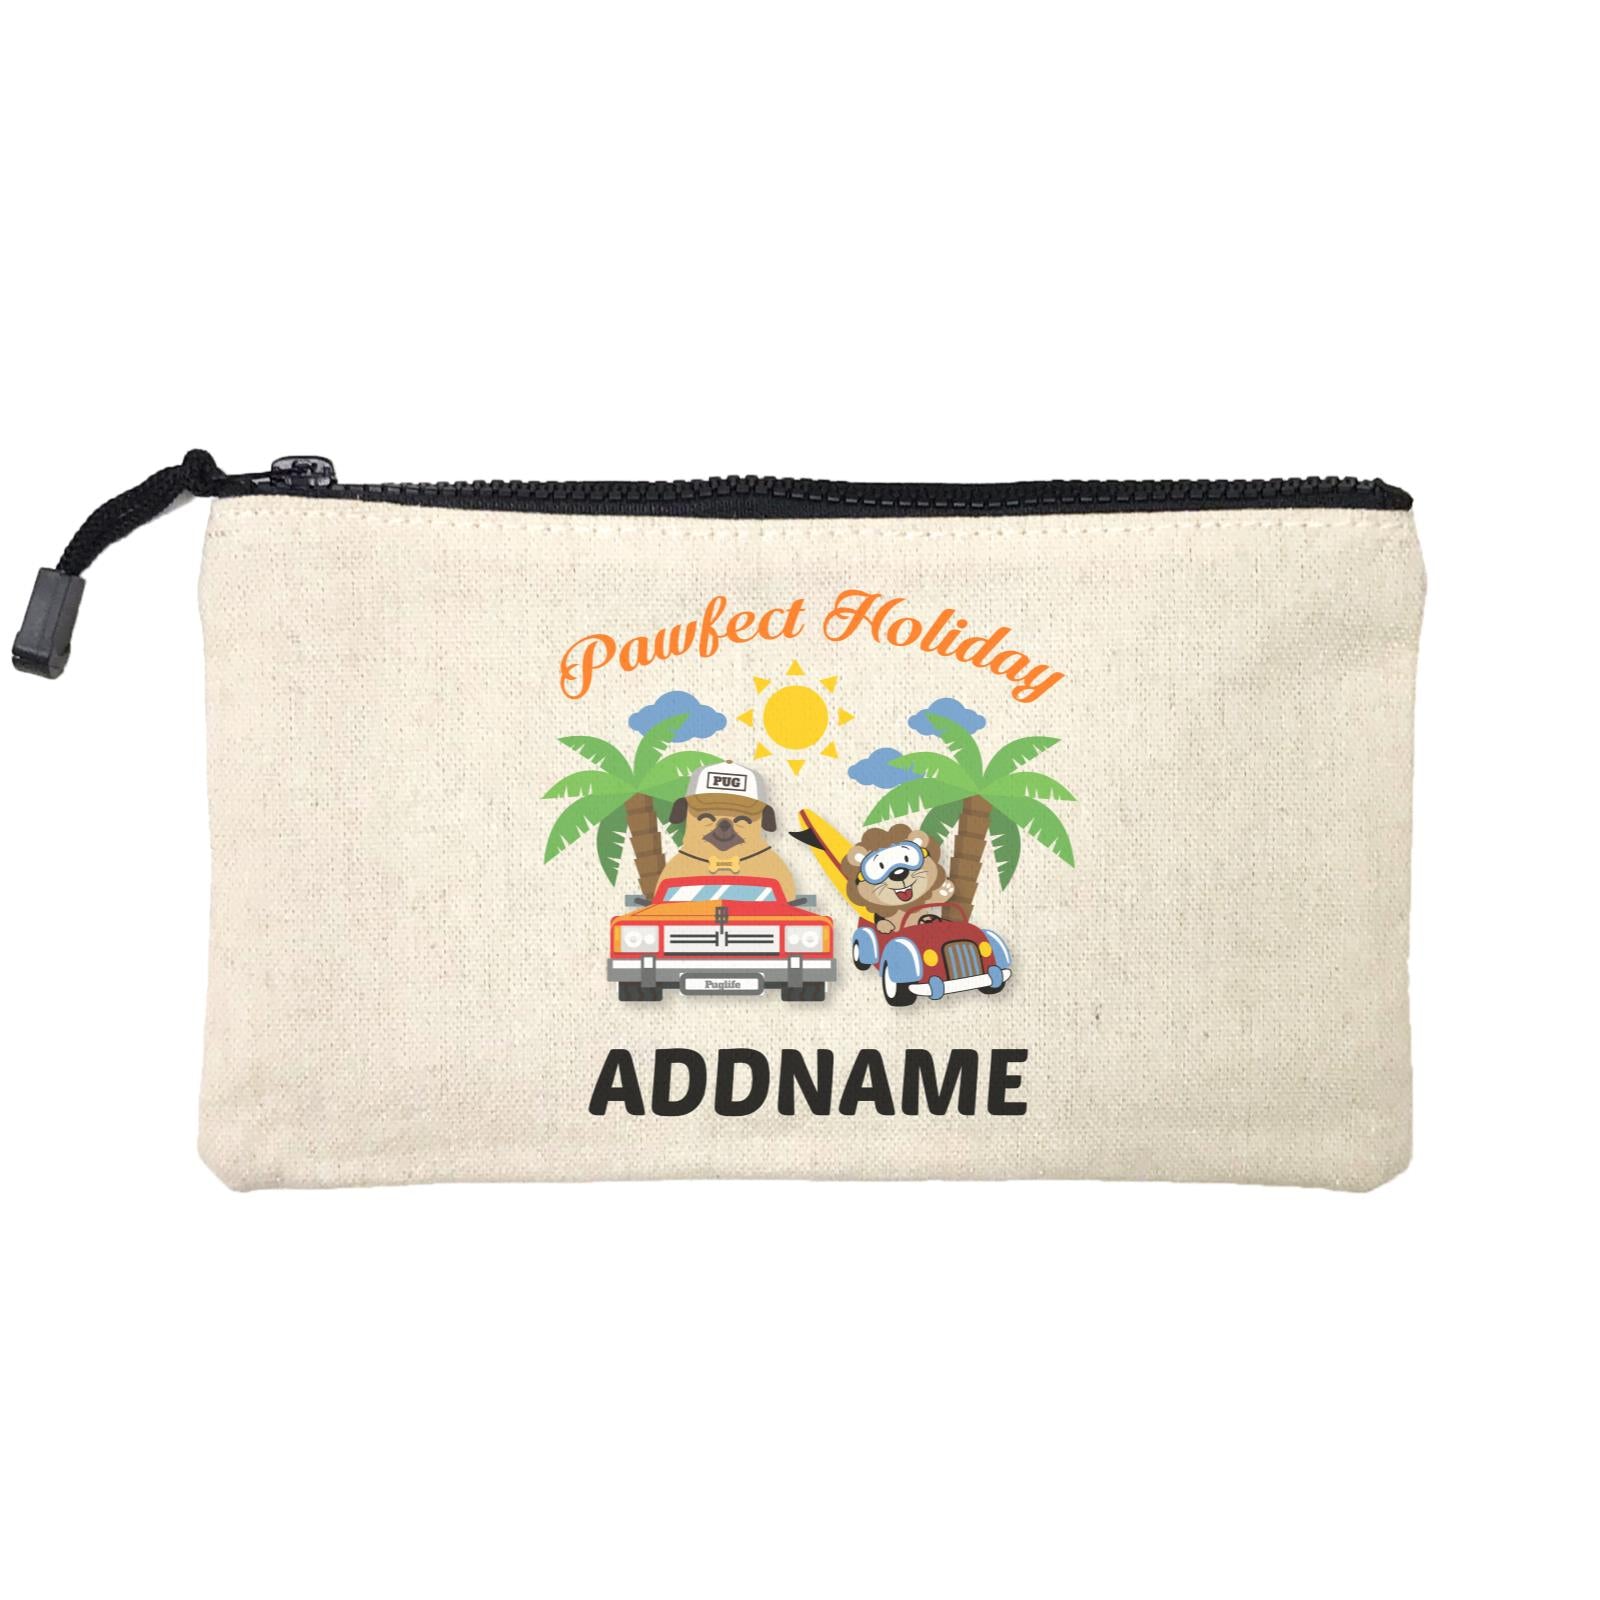 Pawfect Holiday Addname SP Stationery Pouch